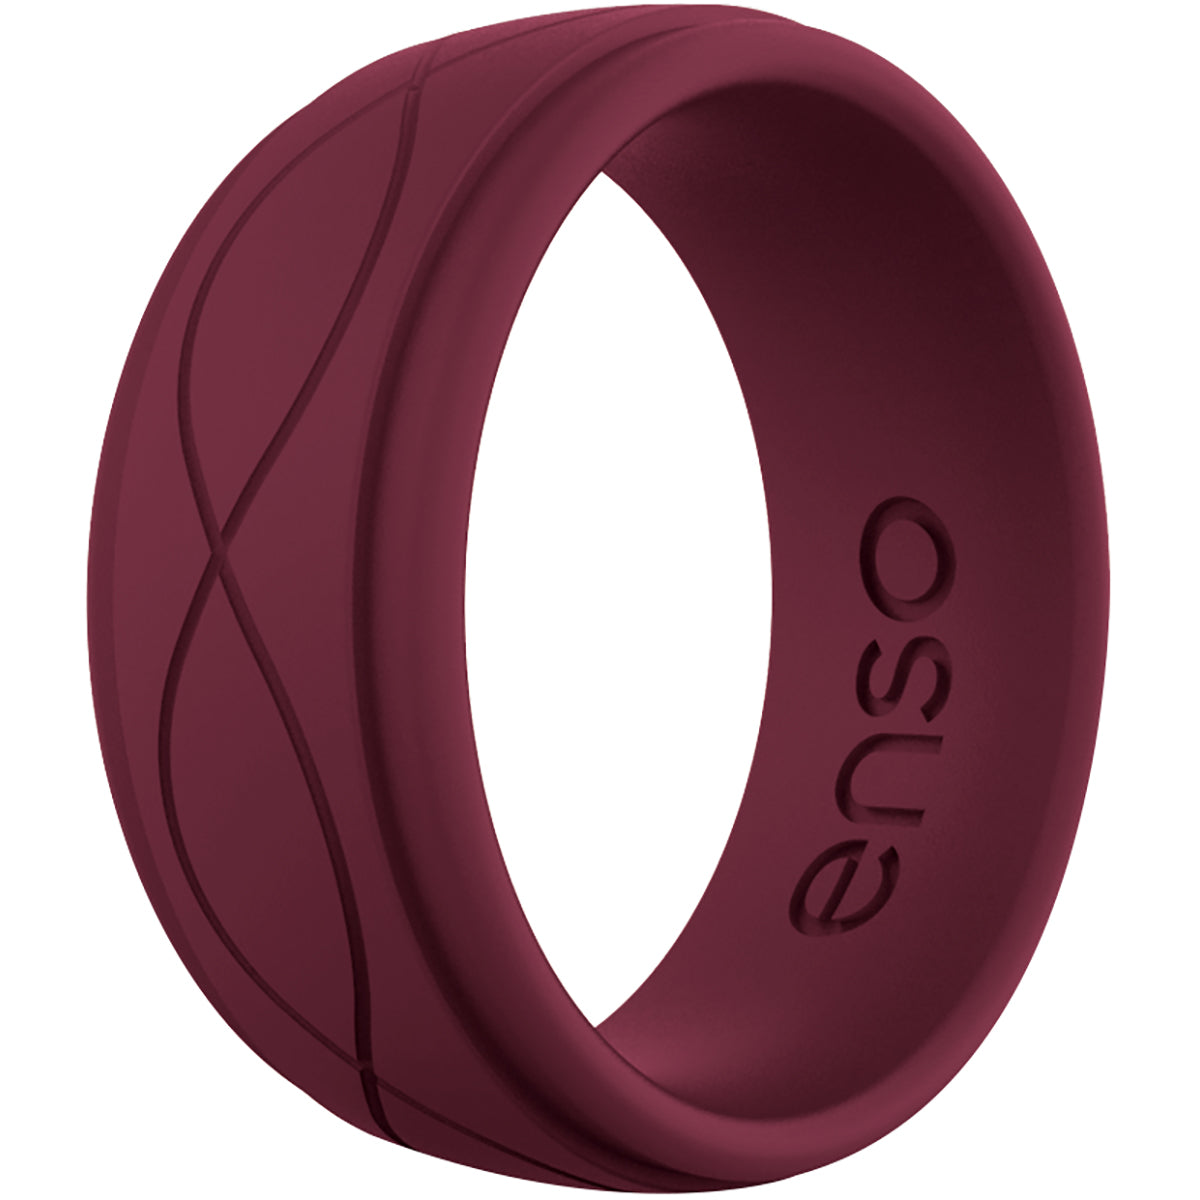 Enso Rings Men's Infinity Series Silicone Ring - Oxblood Enso Rings